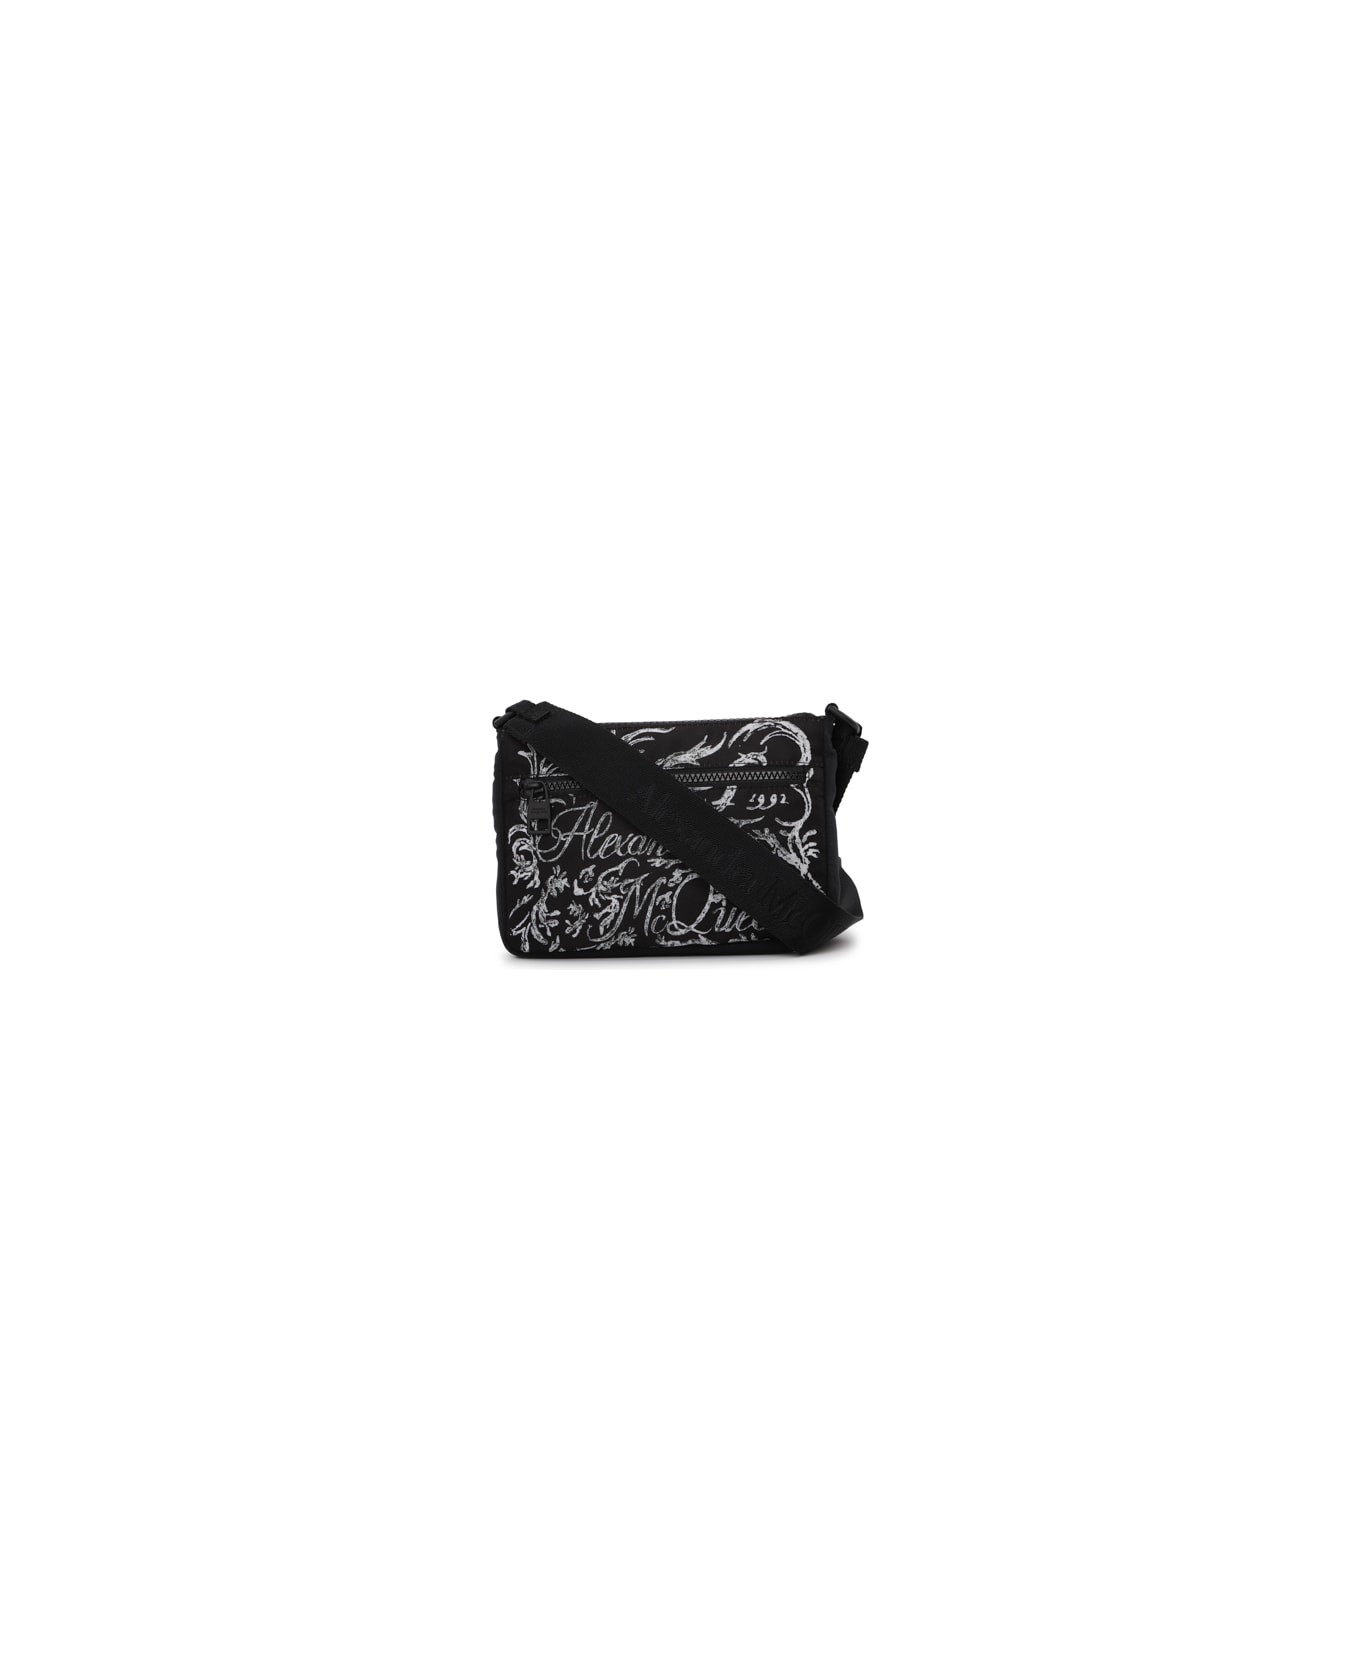 Alexander McQueen Shoulder Bag In Nylon With Blake Painted Logo In Contrast - Black/ white